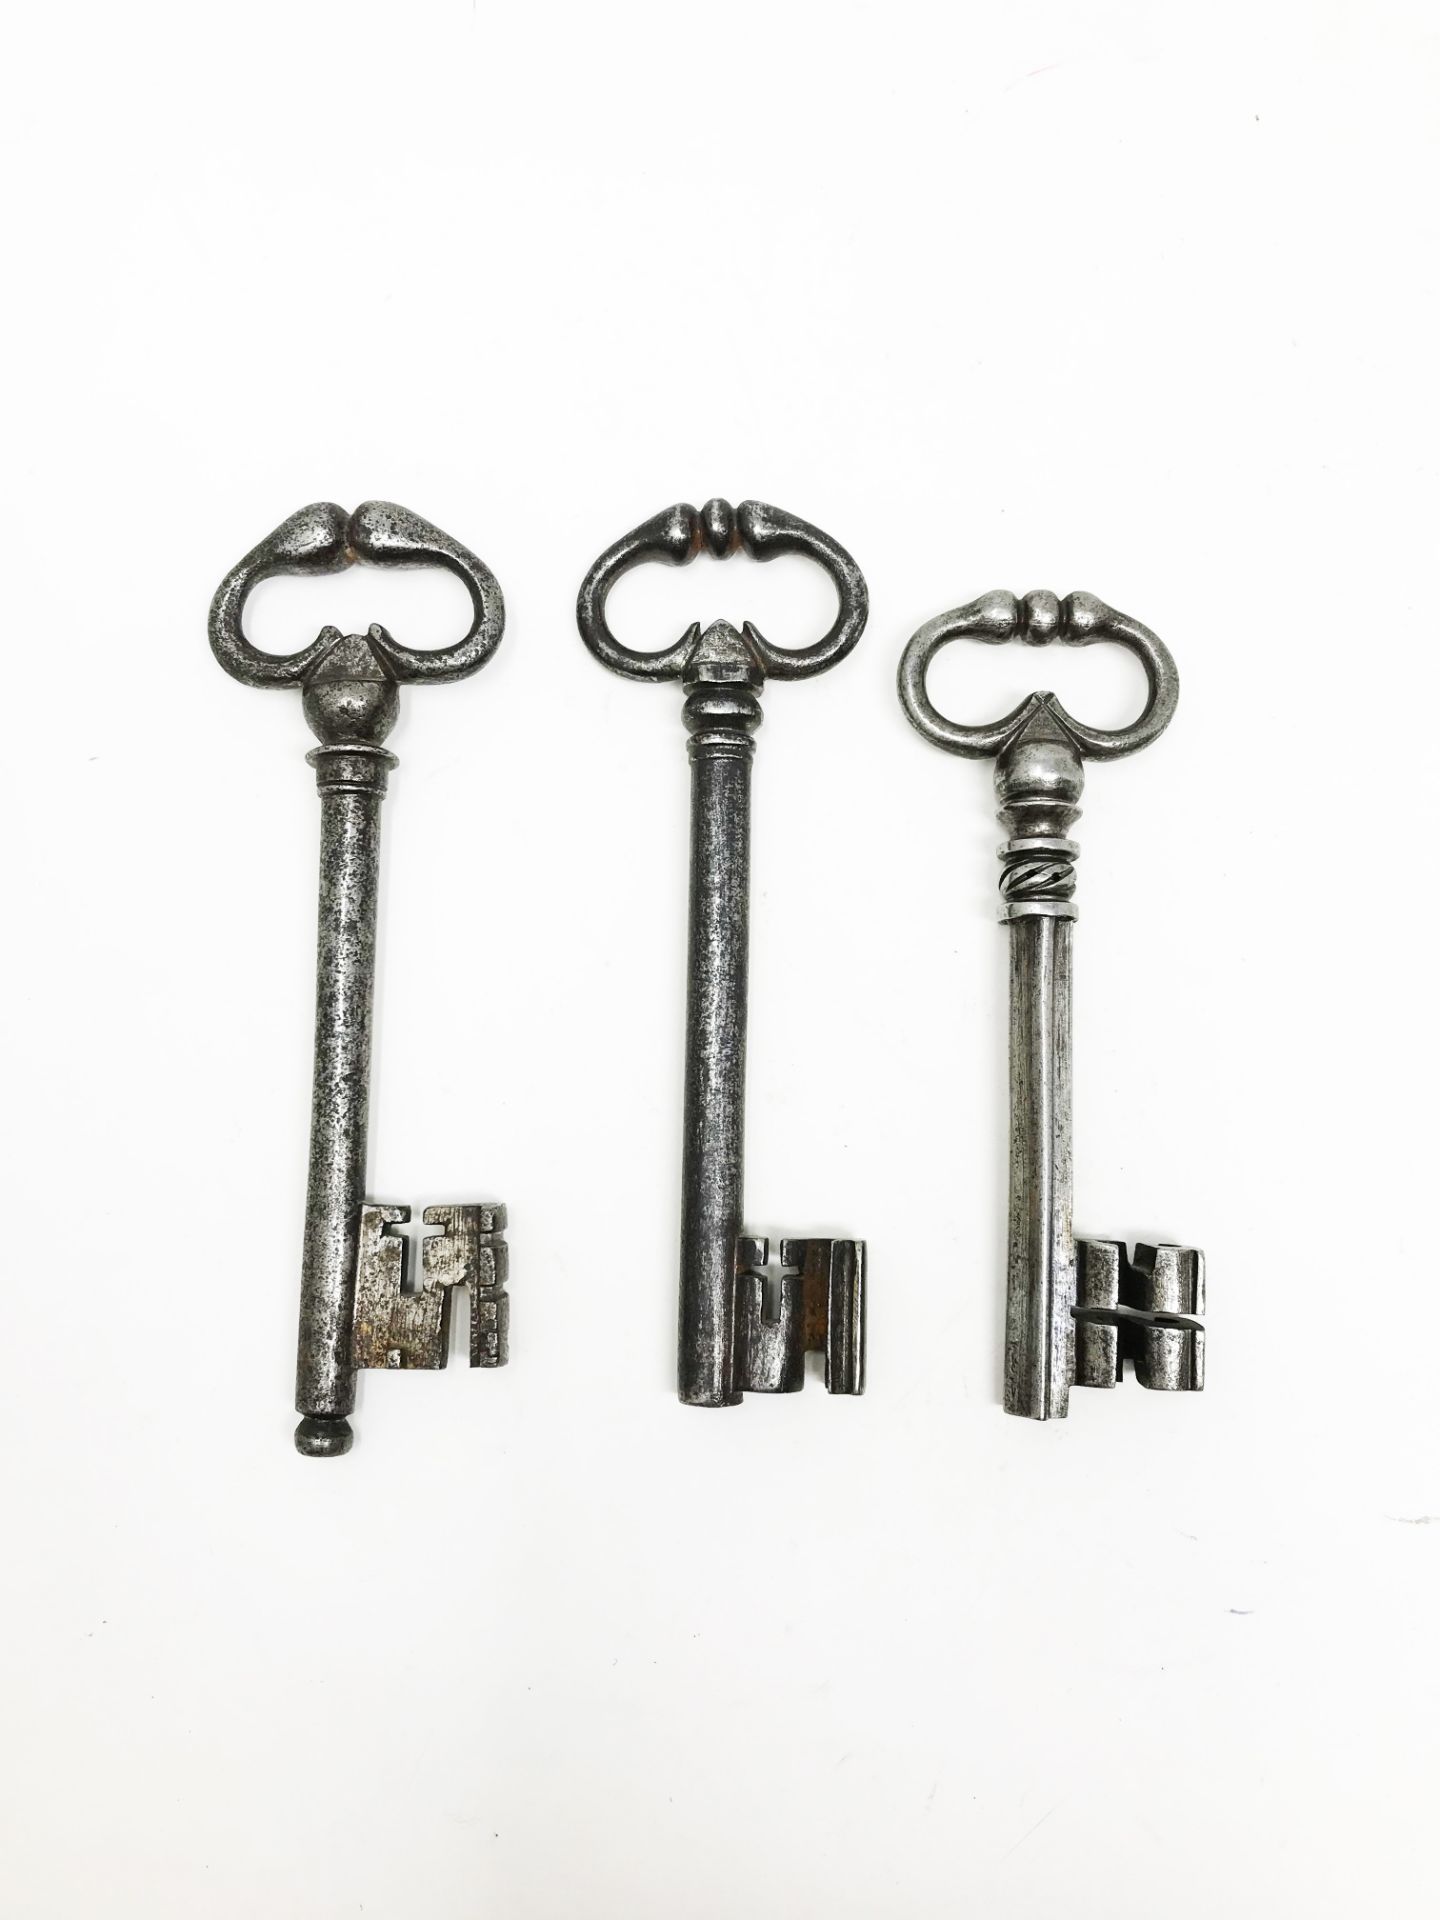 Three keys with frog's legs rings13, 96 - 13, 44 - 12, 25 cmPart of the chapter "From - Image 2 of 4